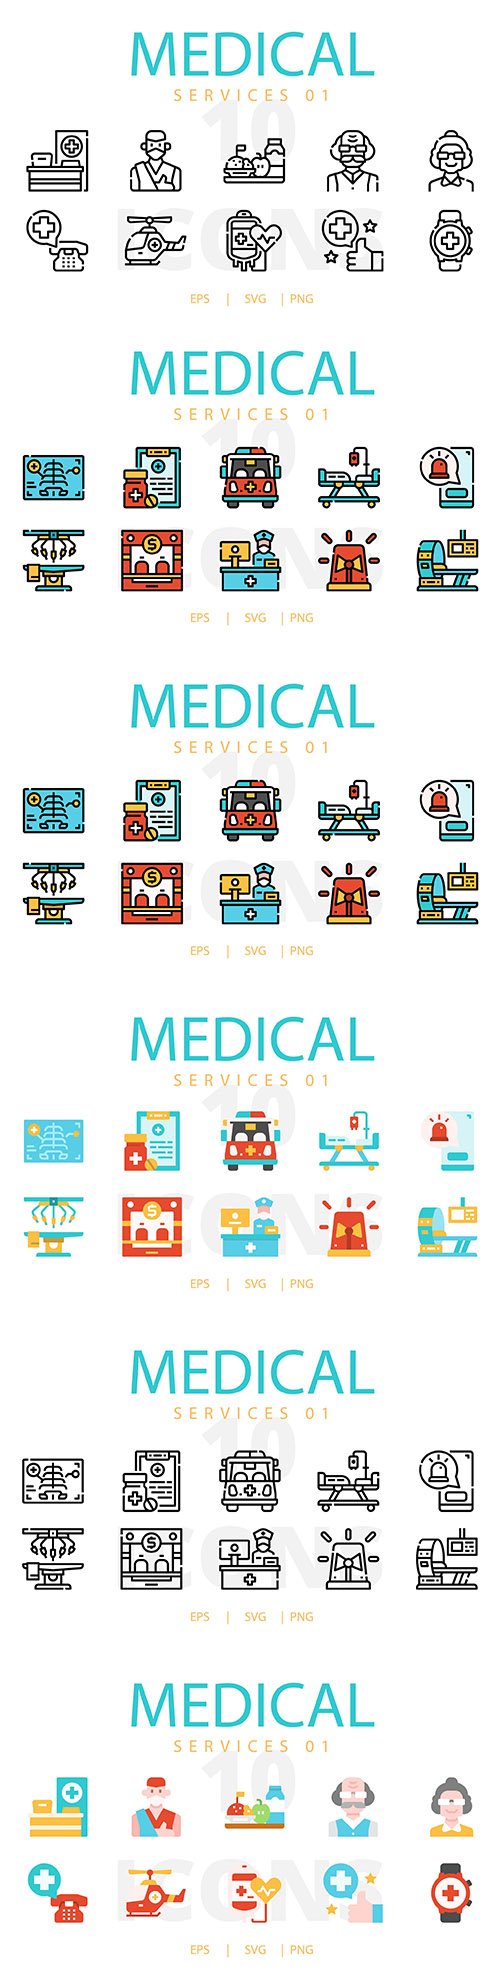 Medical service icons collection